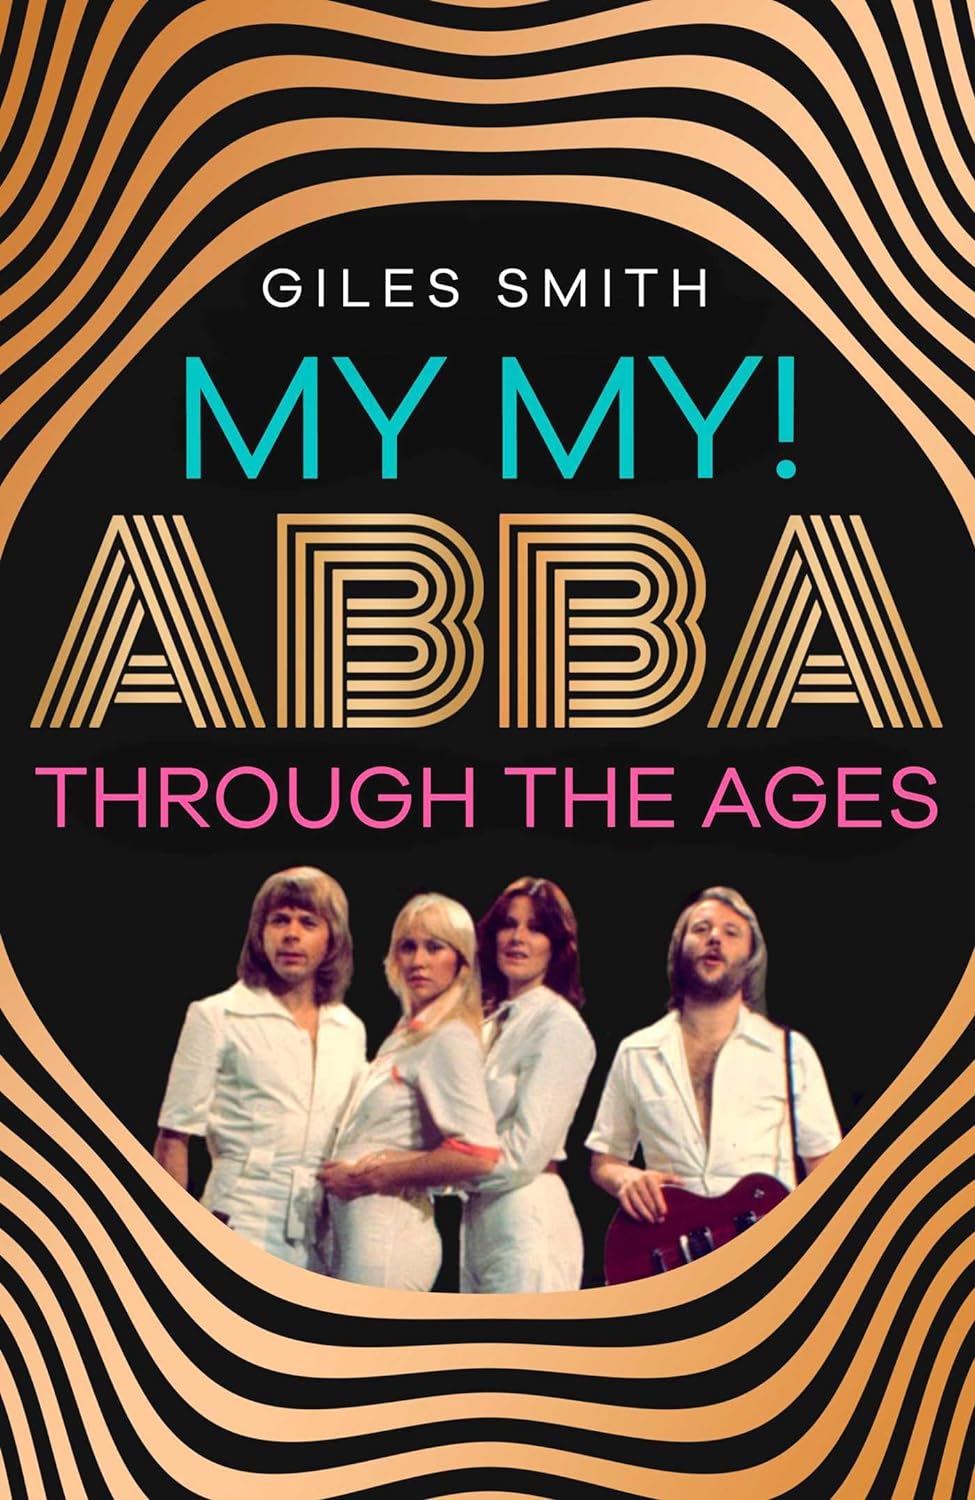 Abba_Through_the_Ages_book_cover